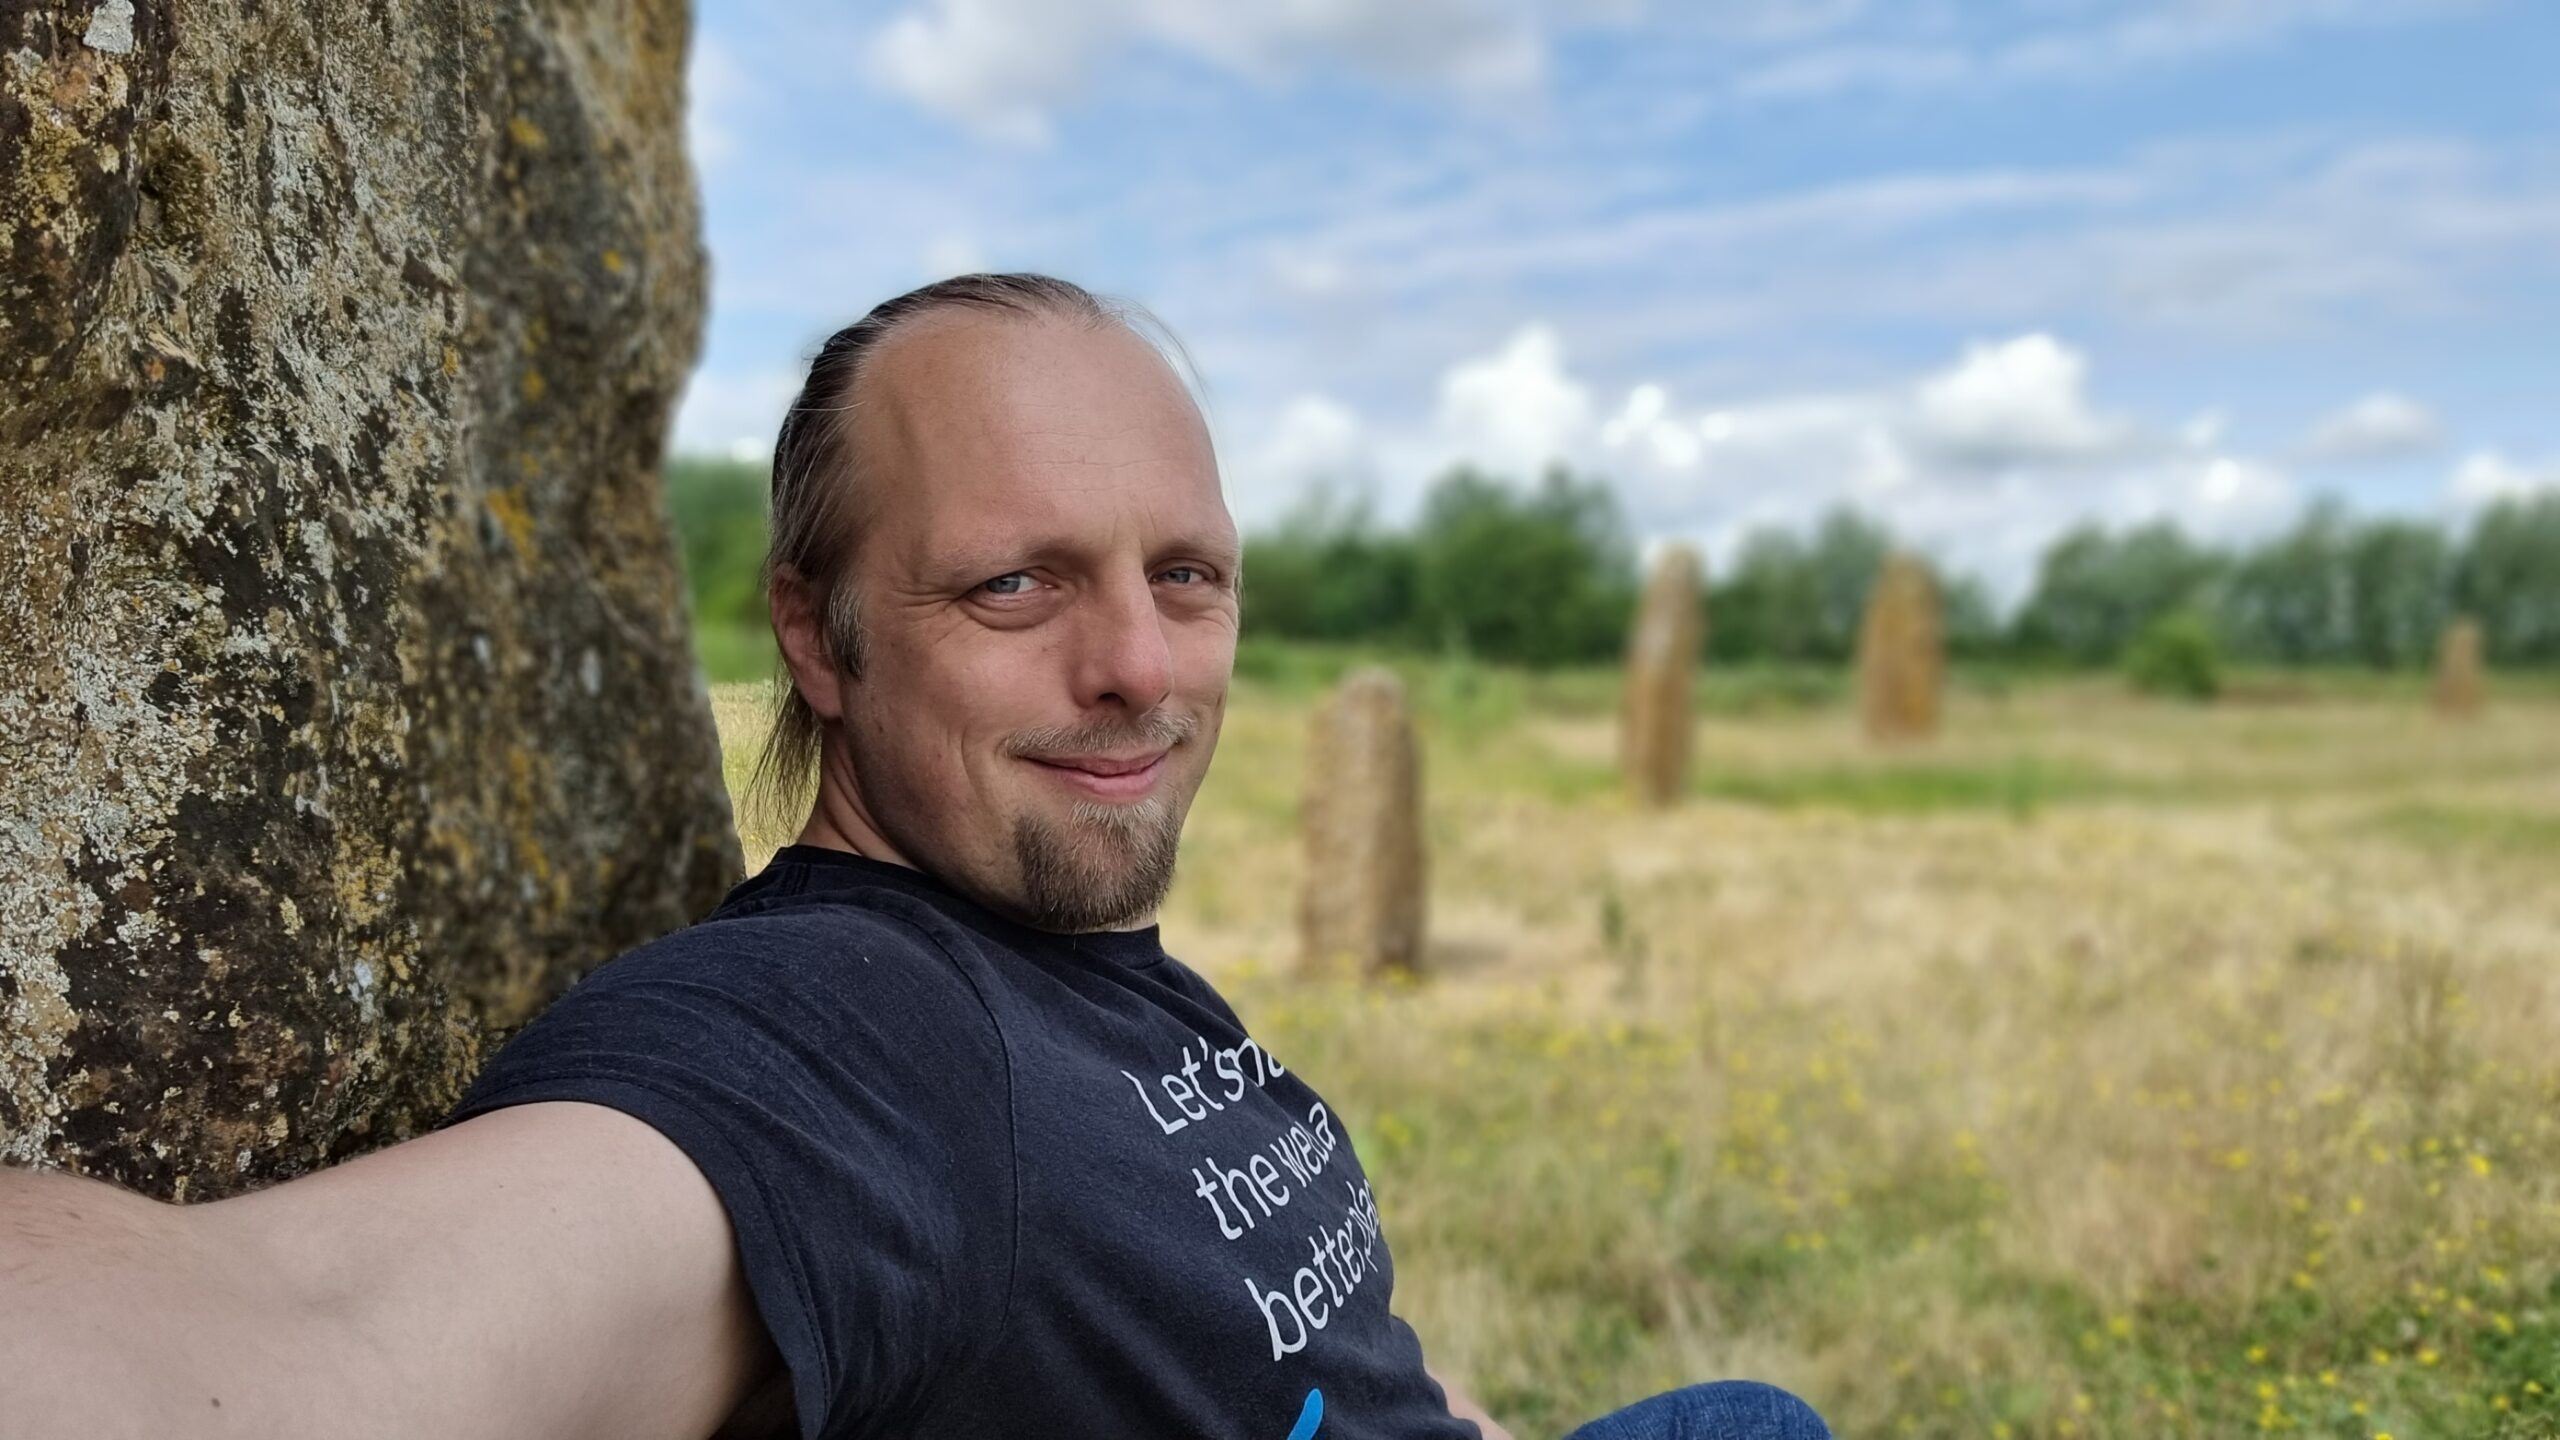 Dan, wearing a black t-shirt with the words "Let's make the web a better place" on, sits with his back to a standing stone. Four more standing stones can be seen stretching away into the bakground, atop a flowery meadow and beneath a slightly cloudy but bright sky.